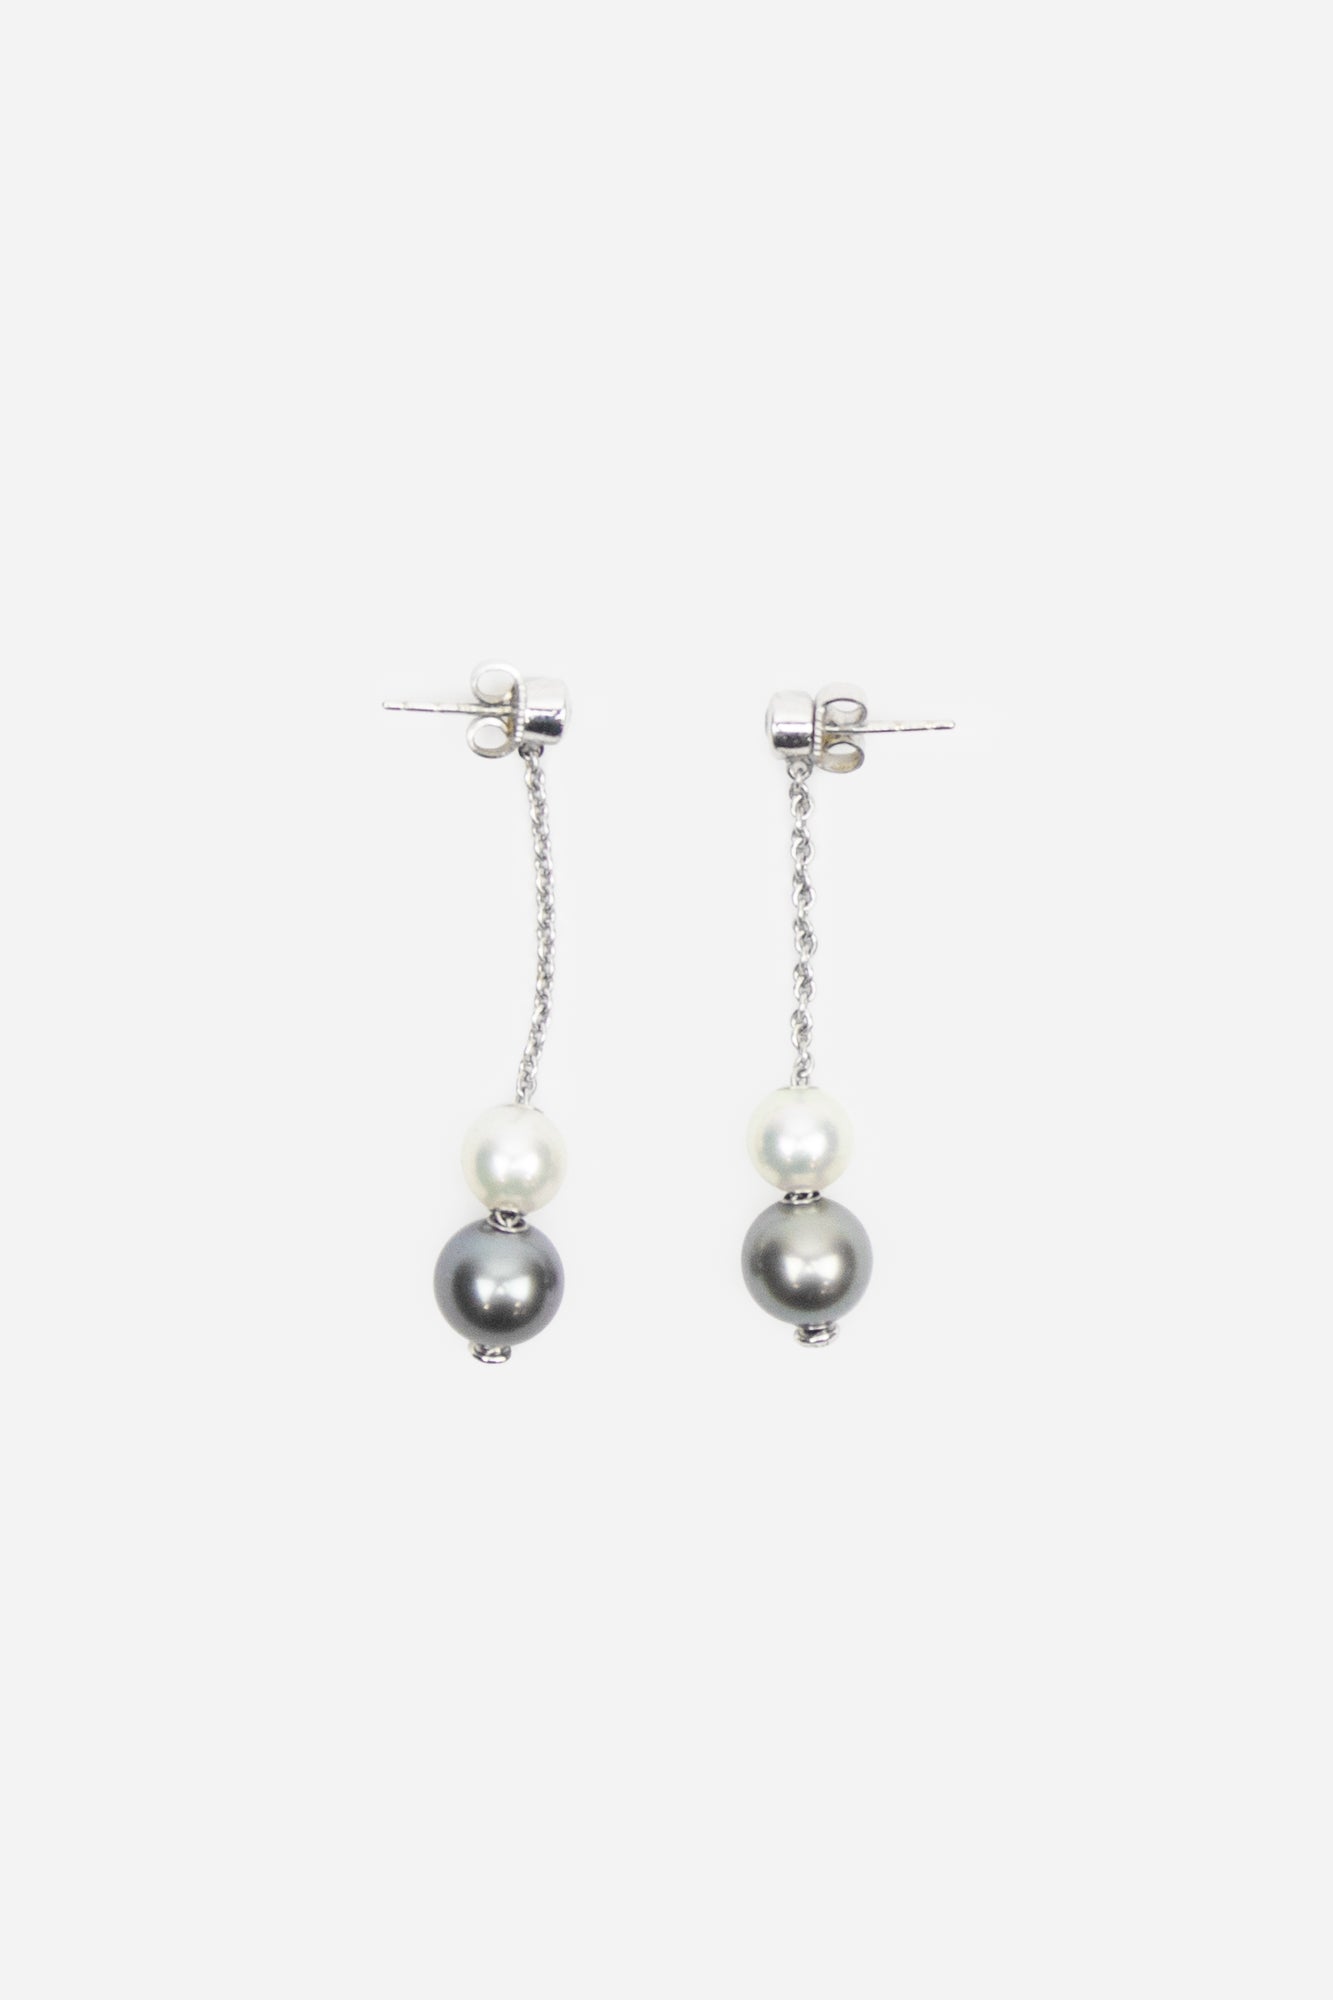 Grey and White Pearls in Motion Dangle Earrings - So Over It Luxury Consignment